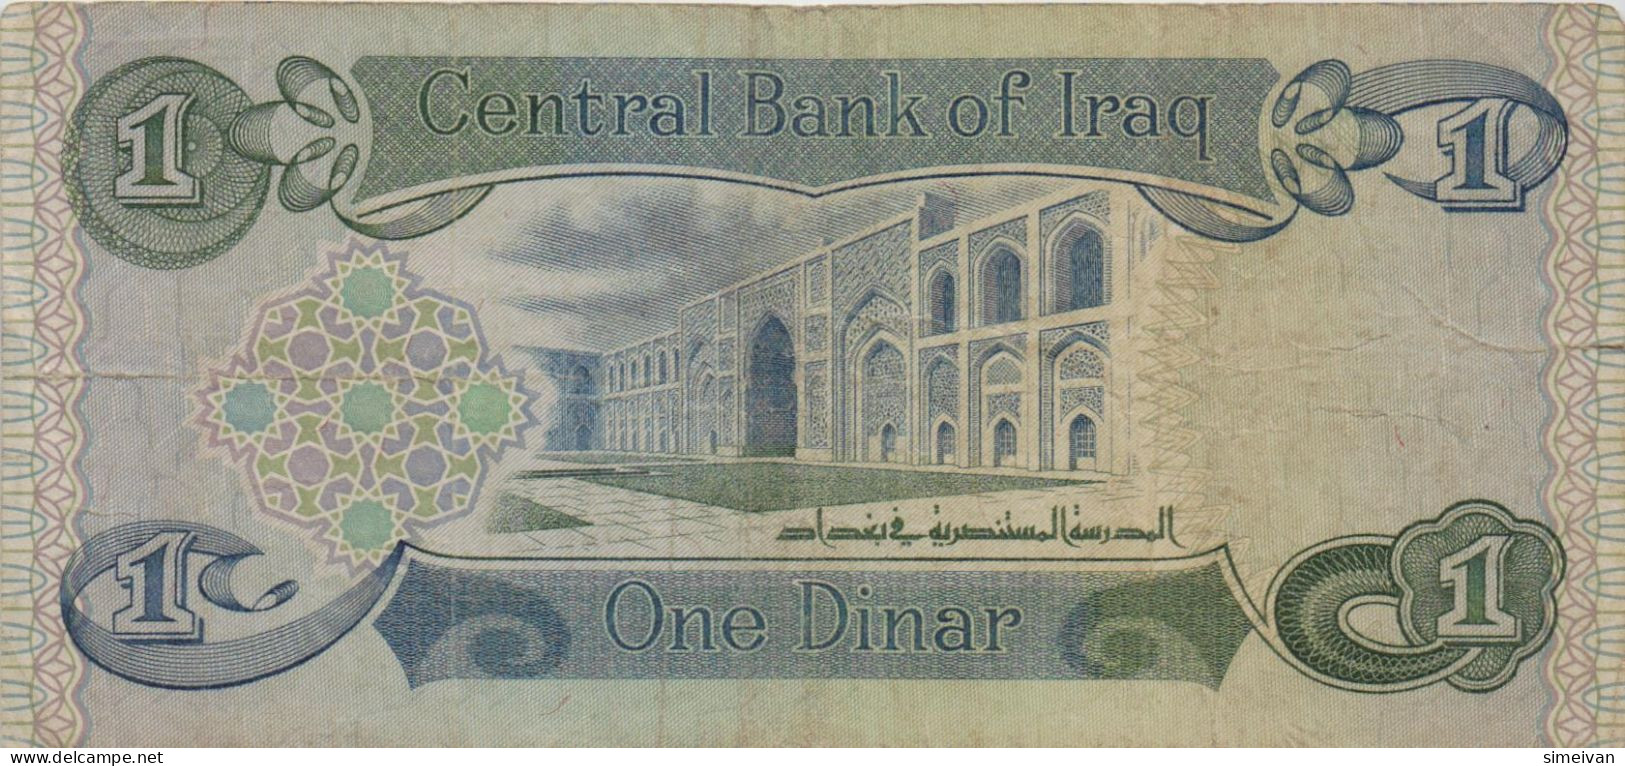 Iraq 1 Dinar 1979 P-69  Banknote Middle East Currency Irak  #5118 - Iraq